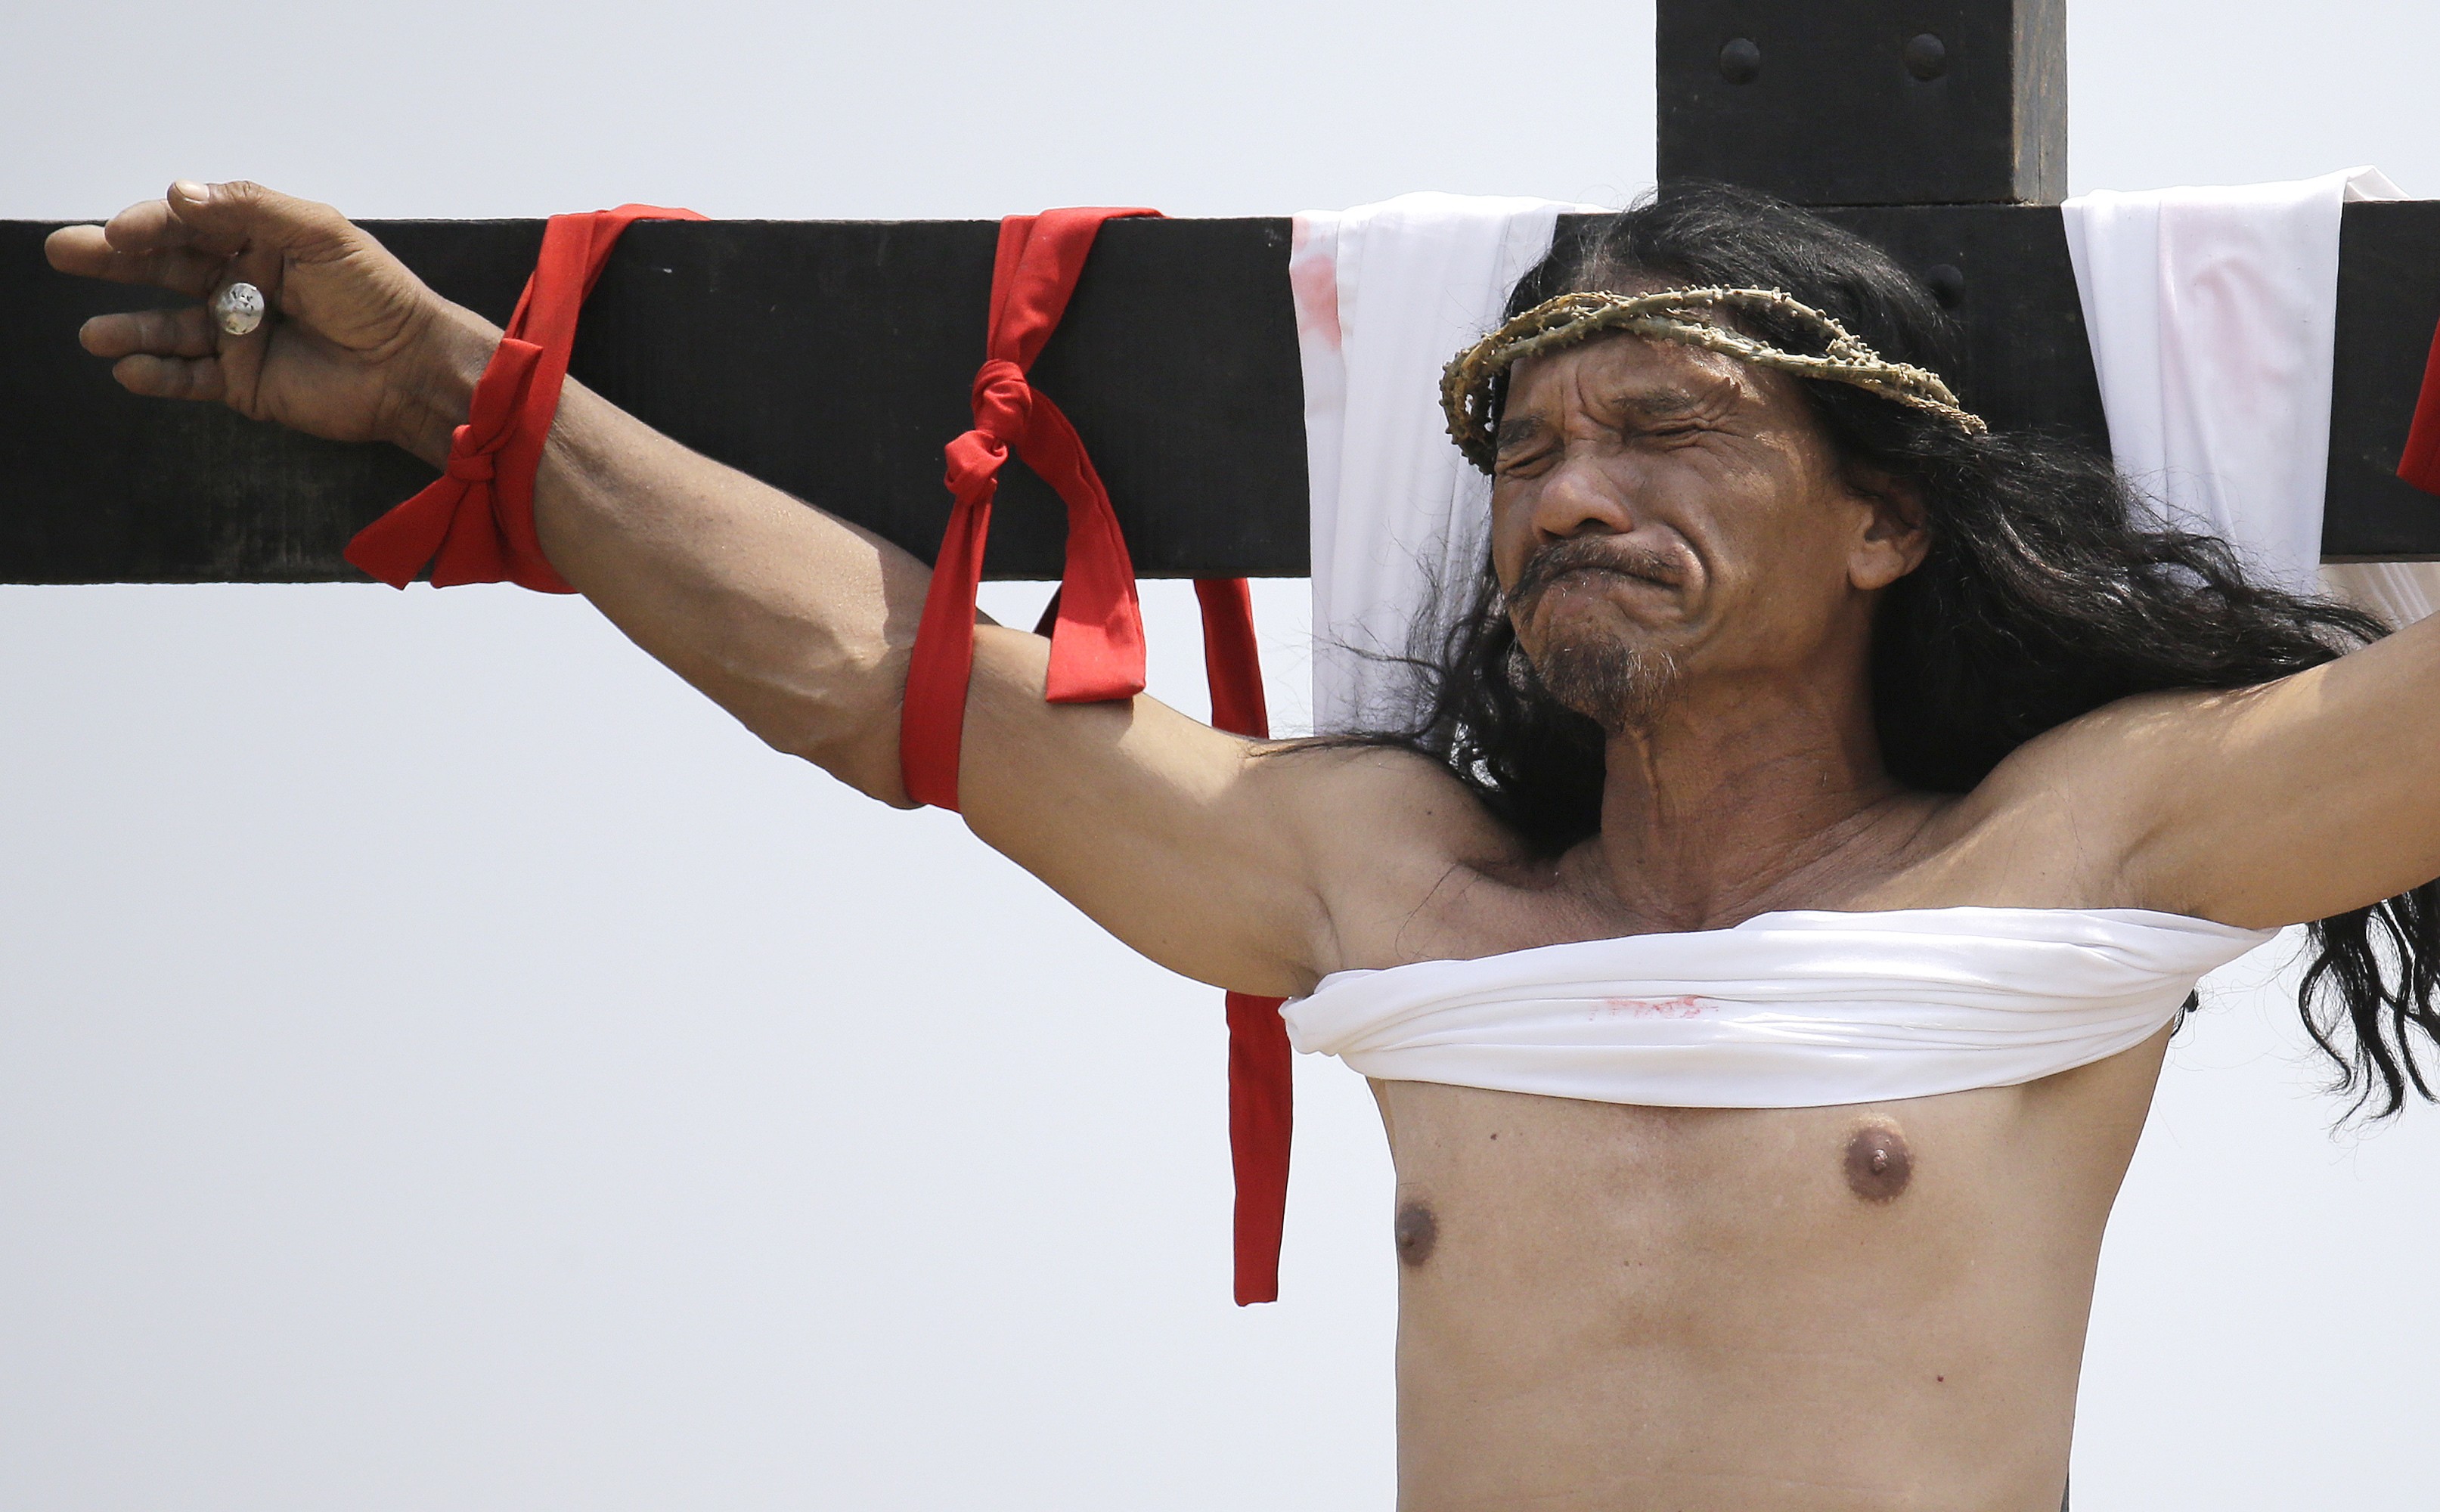 Ruben Enaje reacts after he was nailed to the cross for the 32nd year in a row during a re-enactment of Jesus Christ's sufferings as part of Good Friday rituals in the village of San Pedro Cutud, Pampanga province, northern Philippines. Photo: AFP